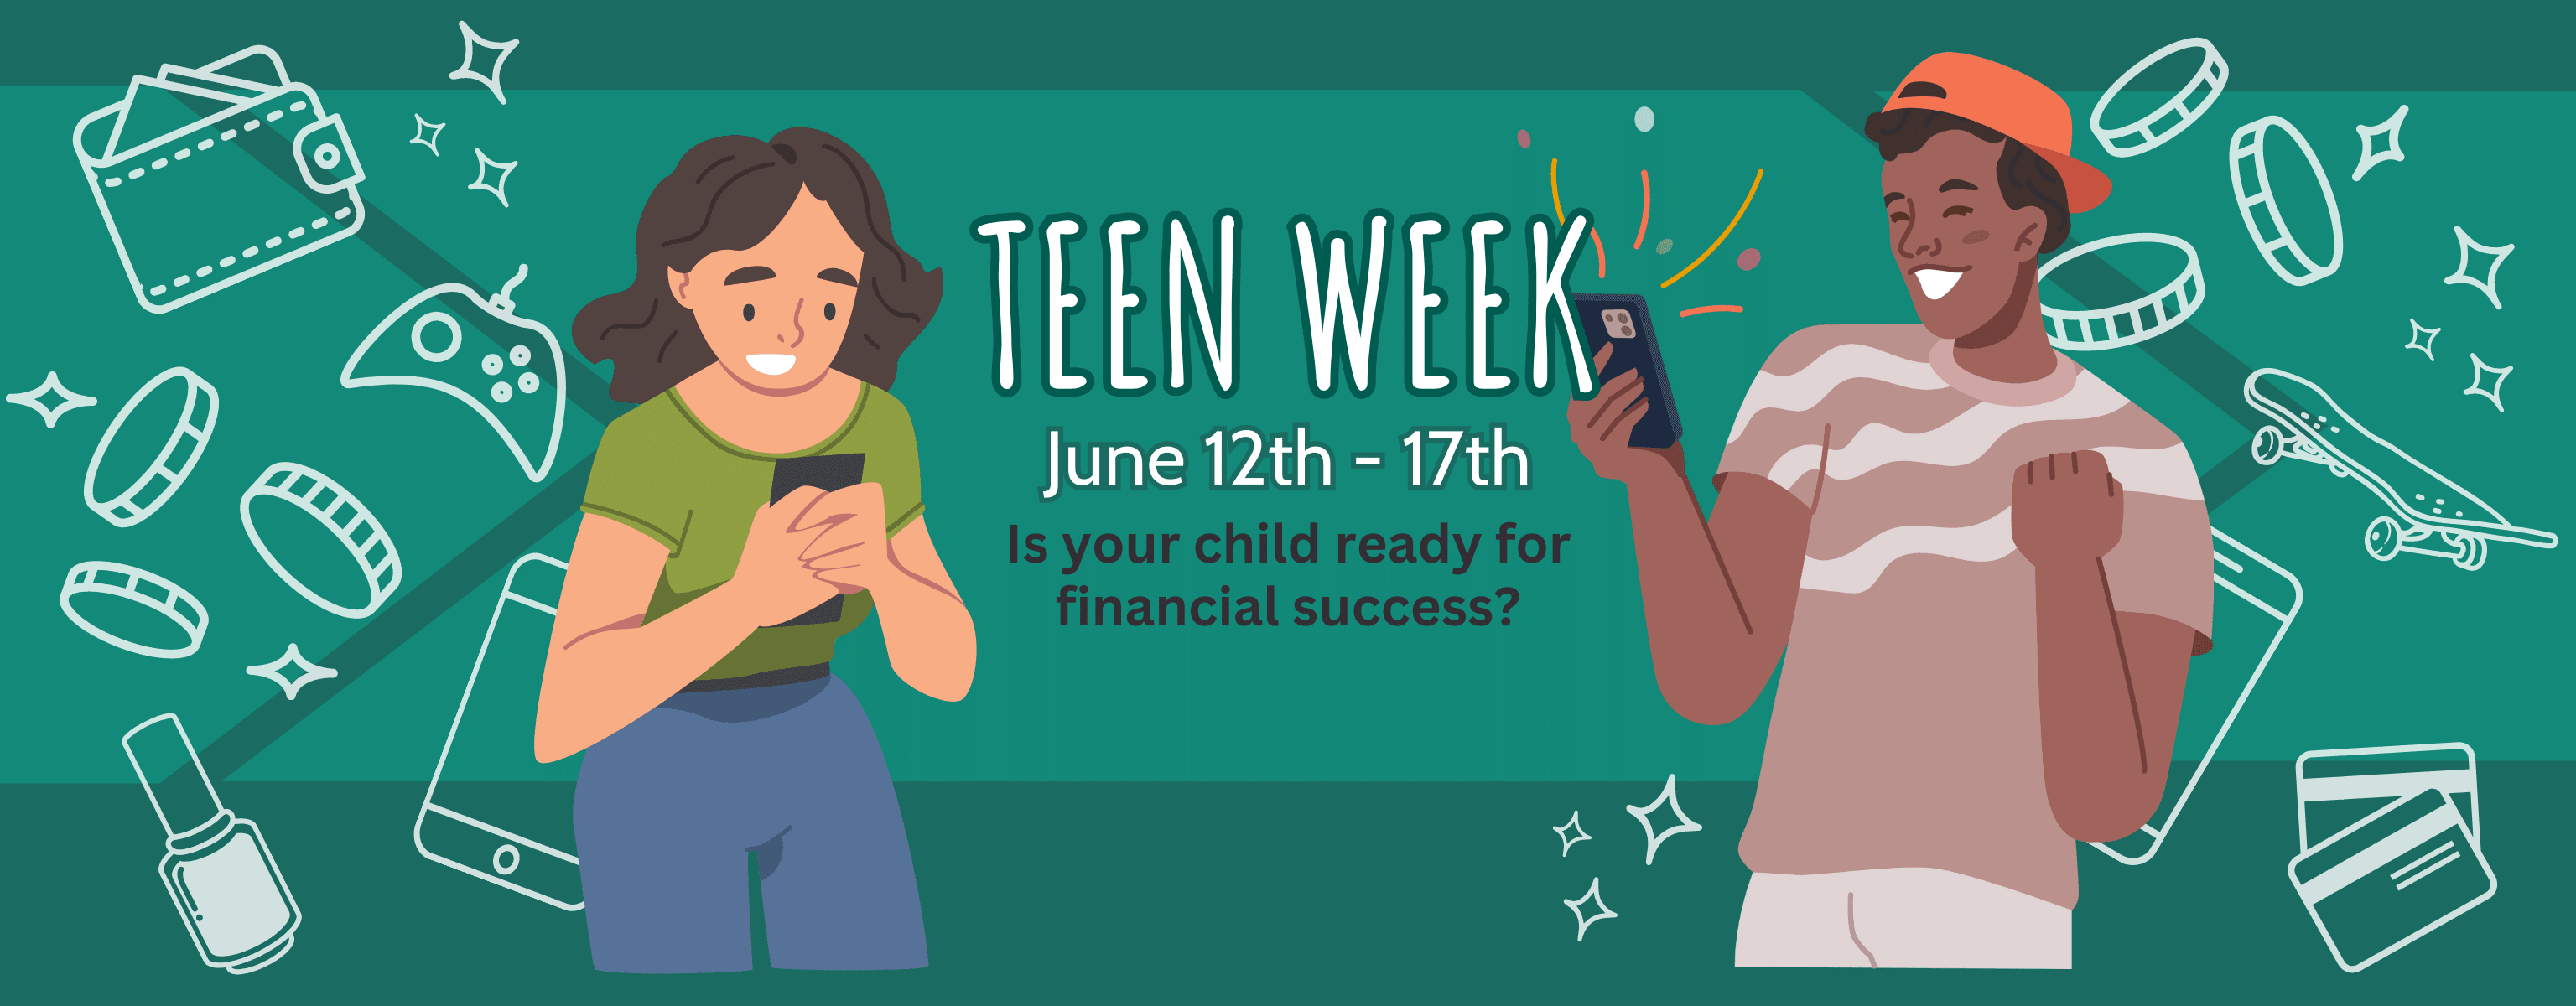 Teen Week June 12th - 17th Is your child ready for financial success?